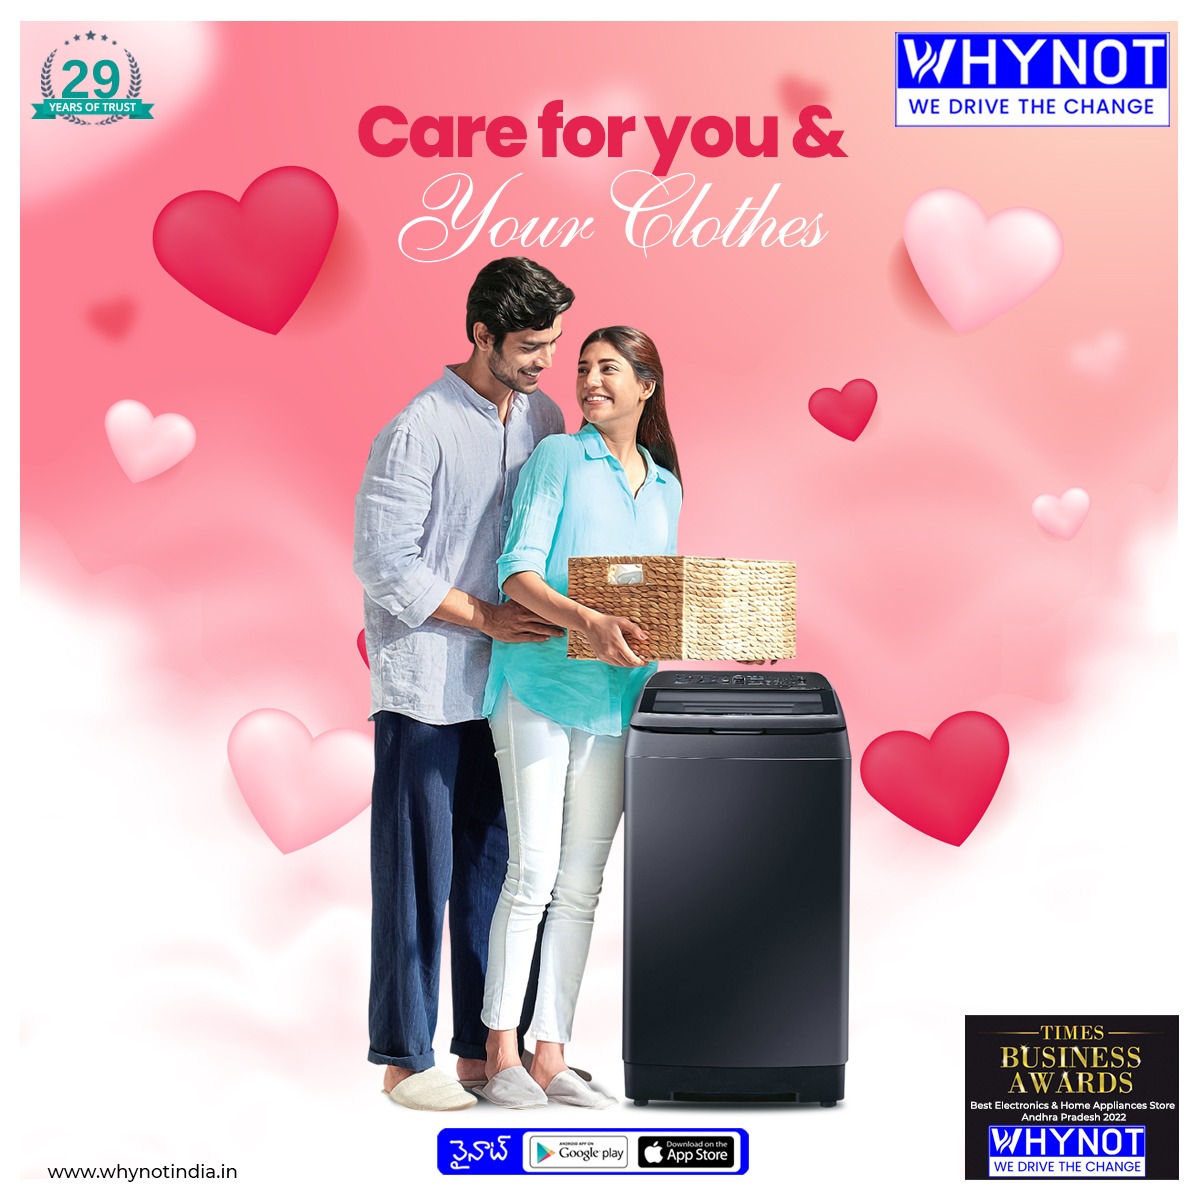 Care for you & Your Clothes!!!

Visit us: whynotindia.in

#whynot #homeappliances #electronicitems #washingmachine #highquality #easywash #washingclothes #outfits #smartwash #available #visitwhynotstore #whynotindia #electronicgadgets